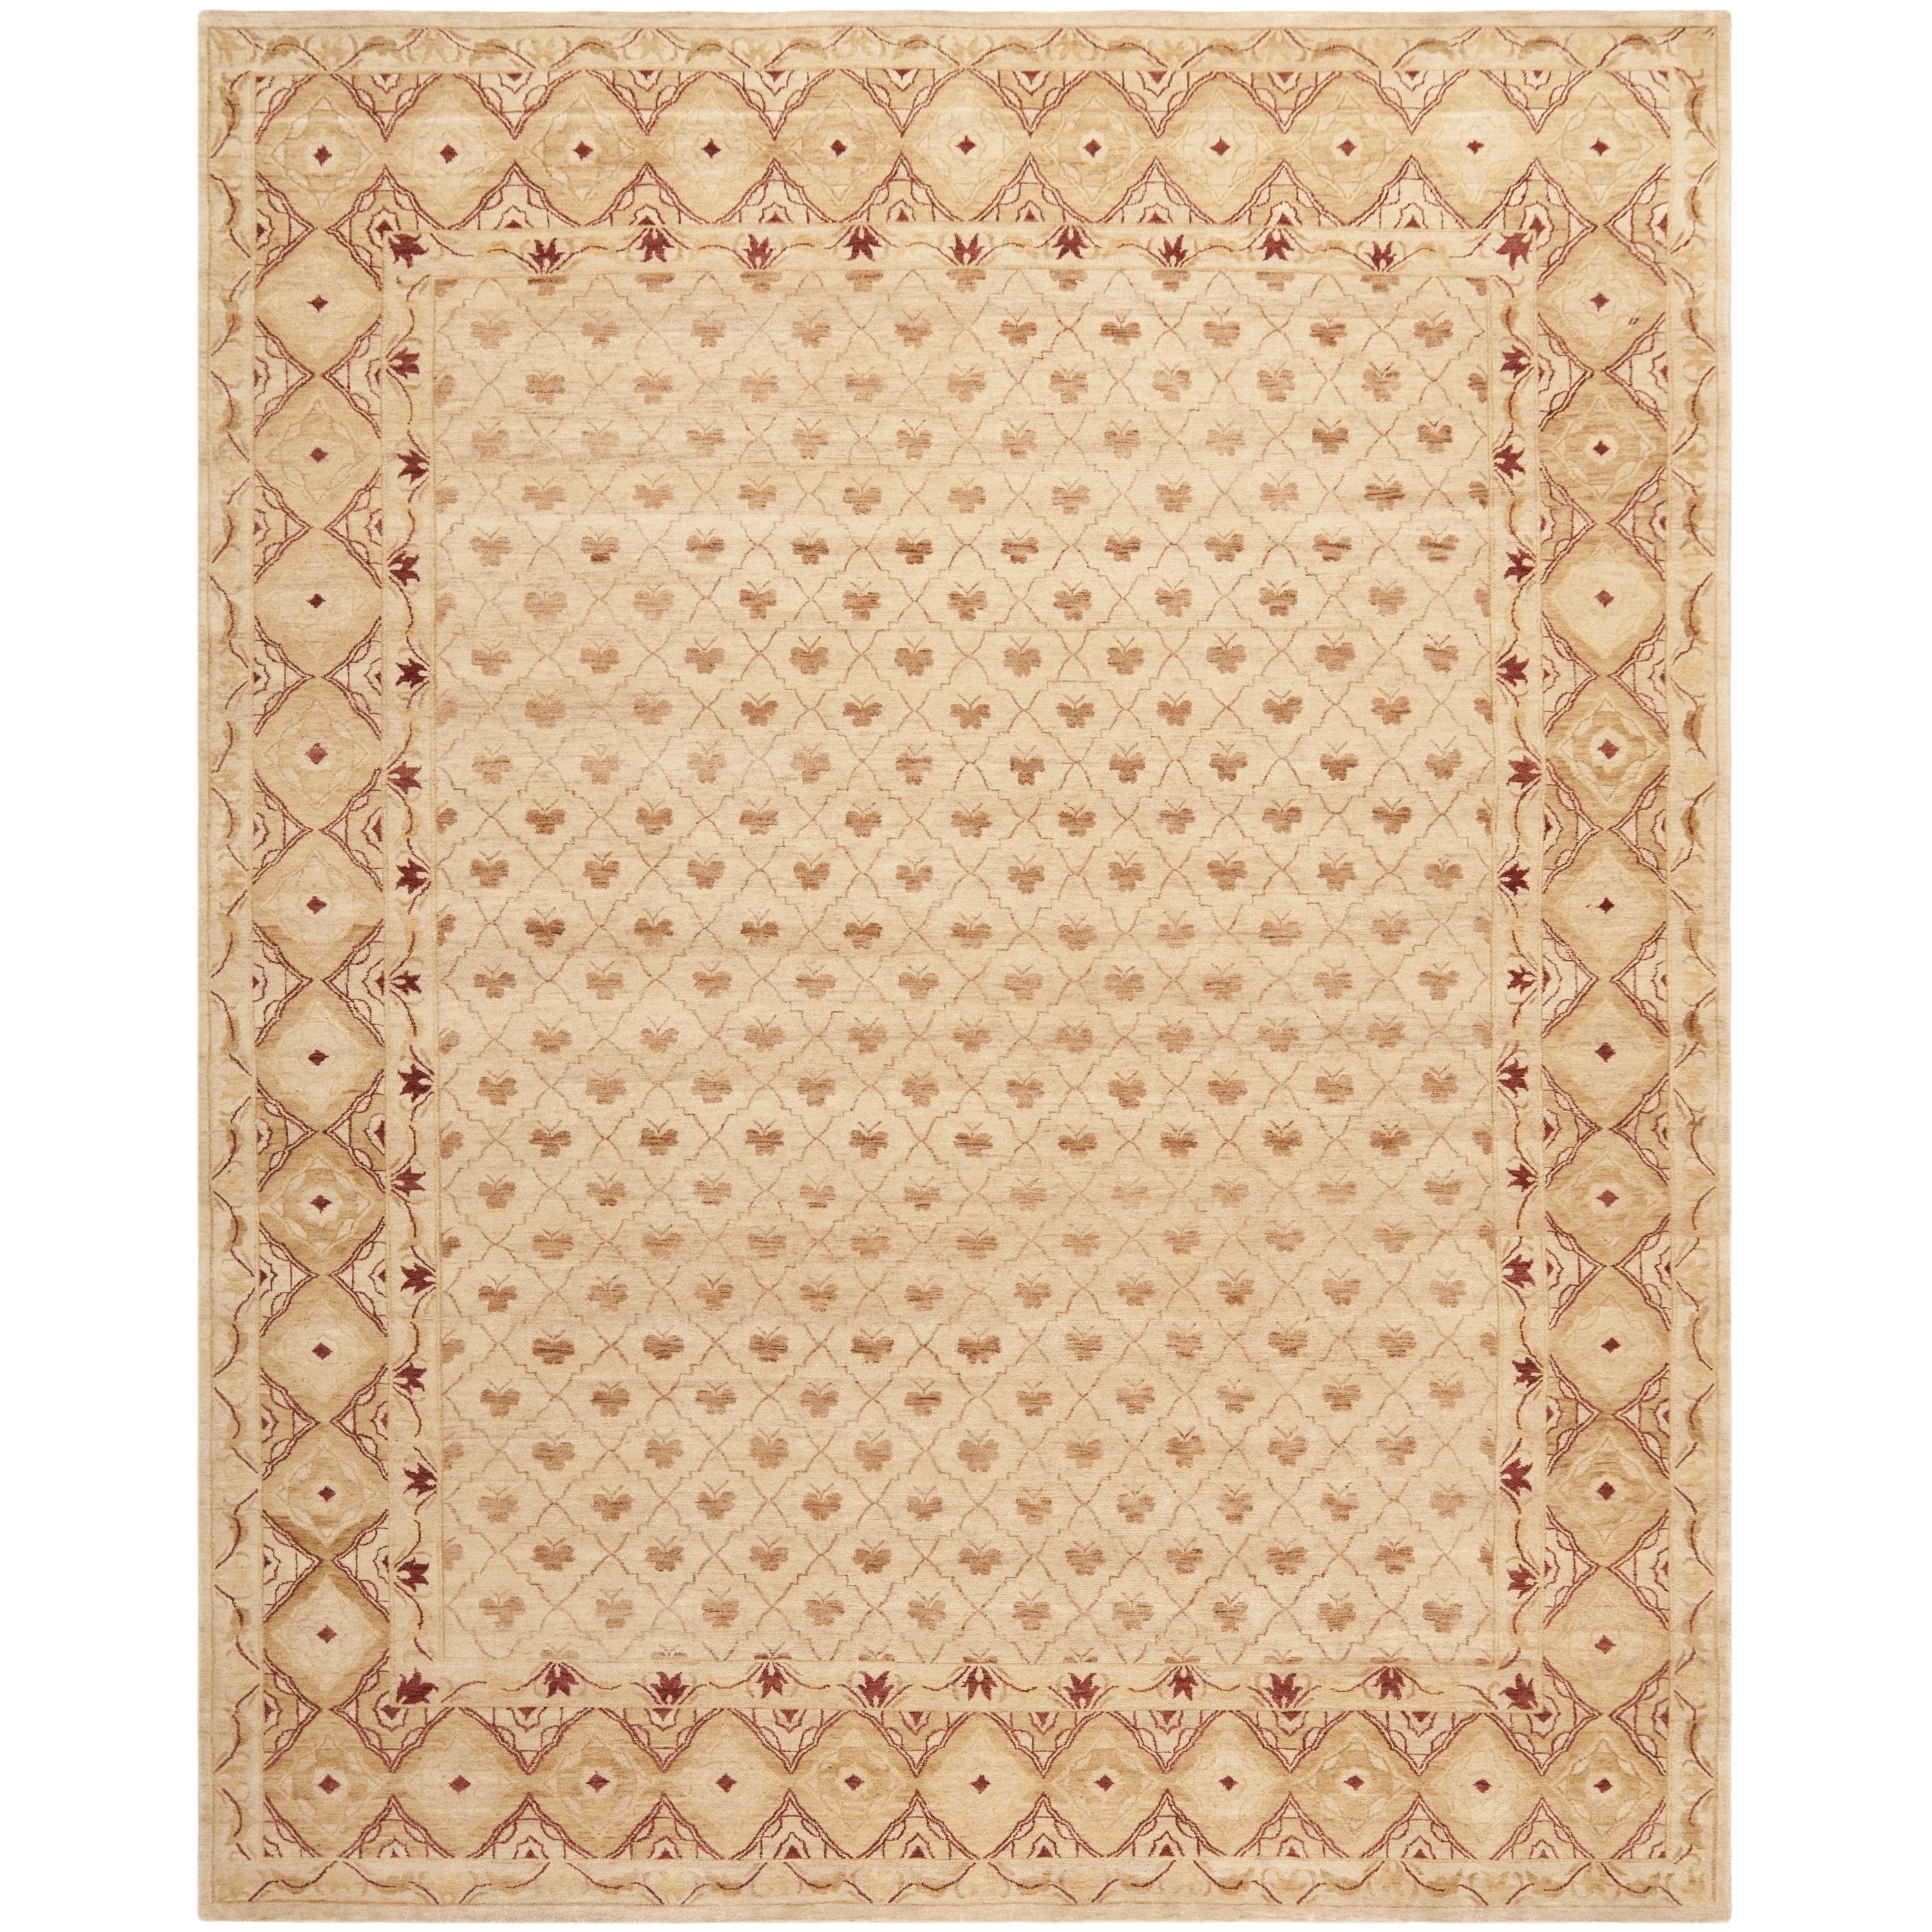 Safavieh Hand knotted Marrakech Ivory/ Red Wool Rug (9 X 12)